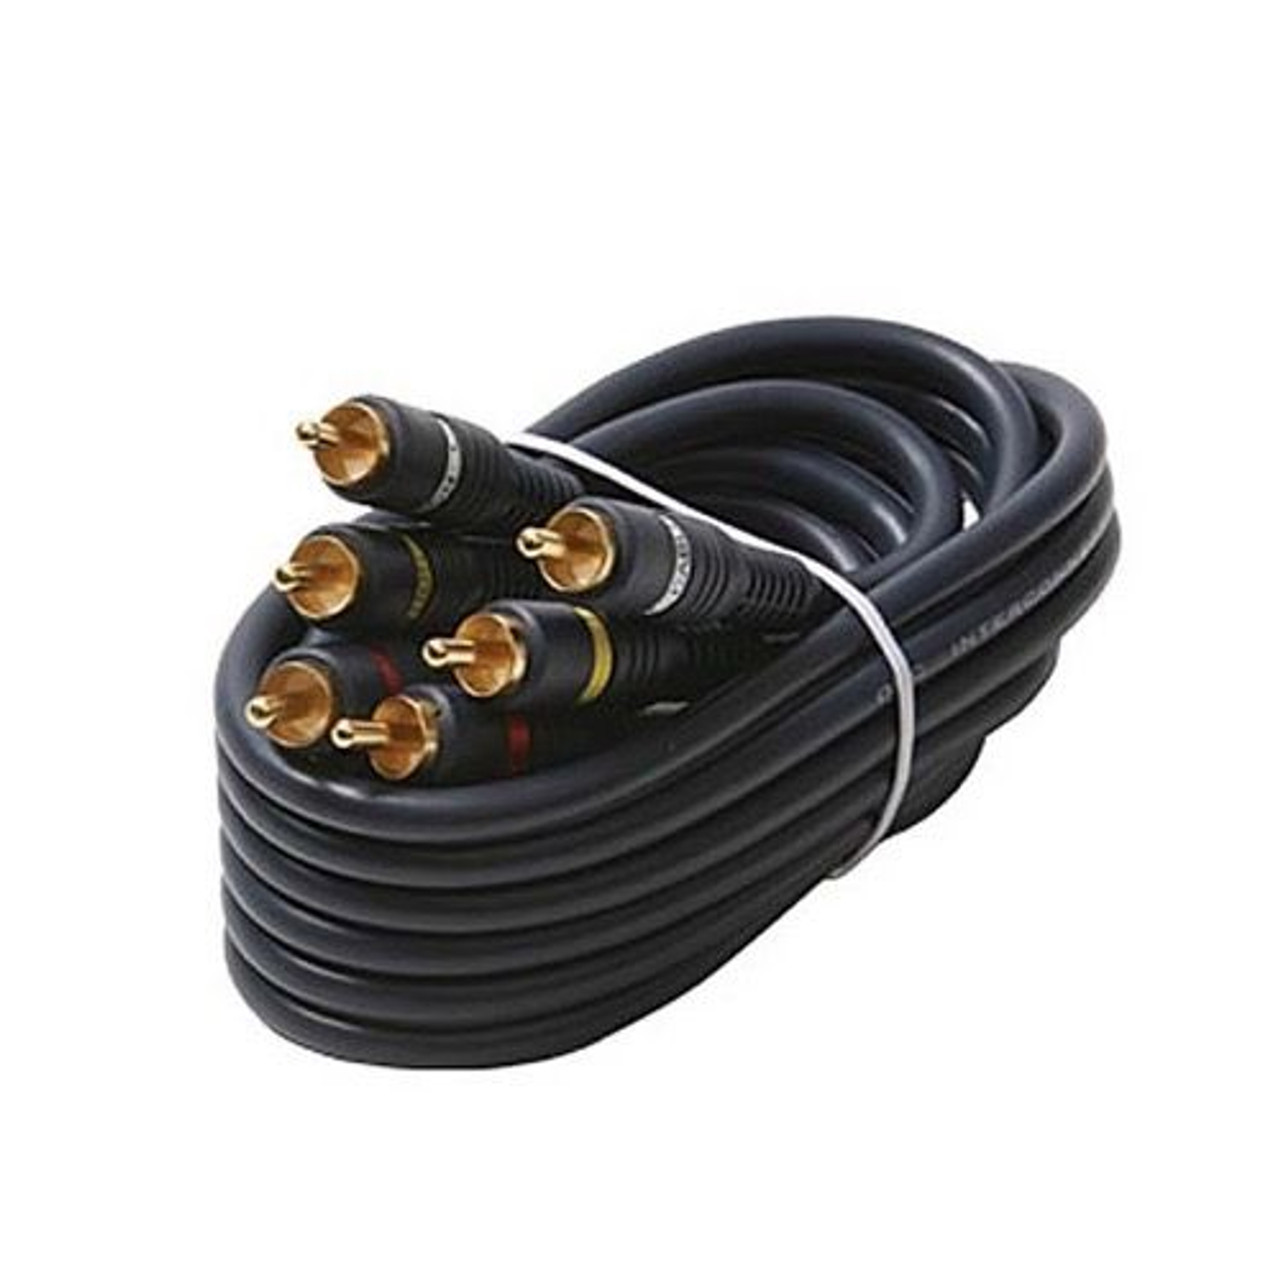 Eagle 100' FT 3 RCA Composite Cable Male to Male Gold Python Home Theater Plate Connectors Blue Audio Video Shielded Stereo RCA Composite Cable